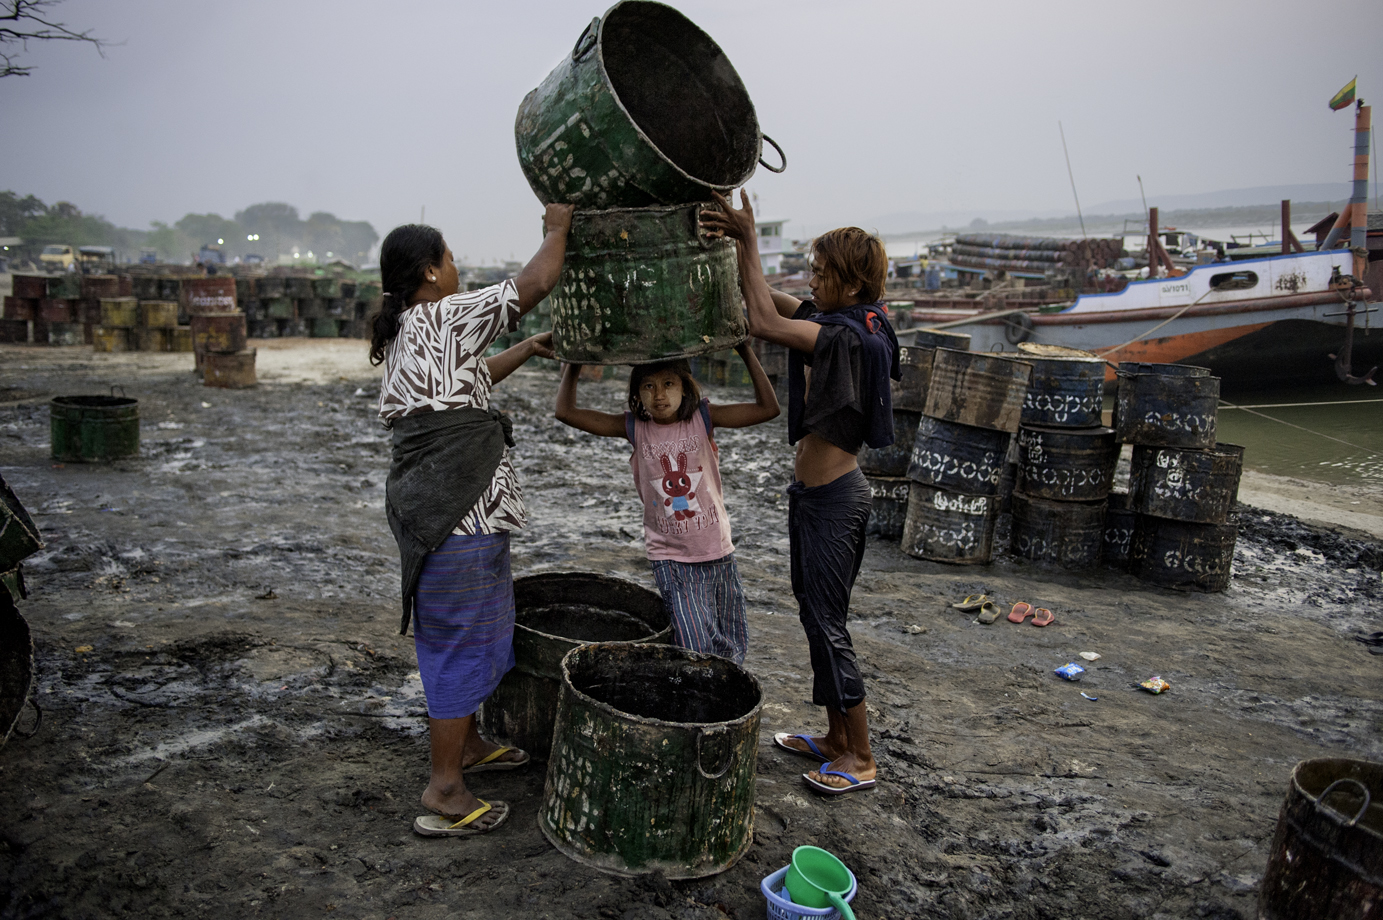  Child labour on the docks of Irrawaddy river / Burma - 2012 